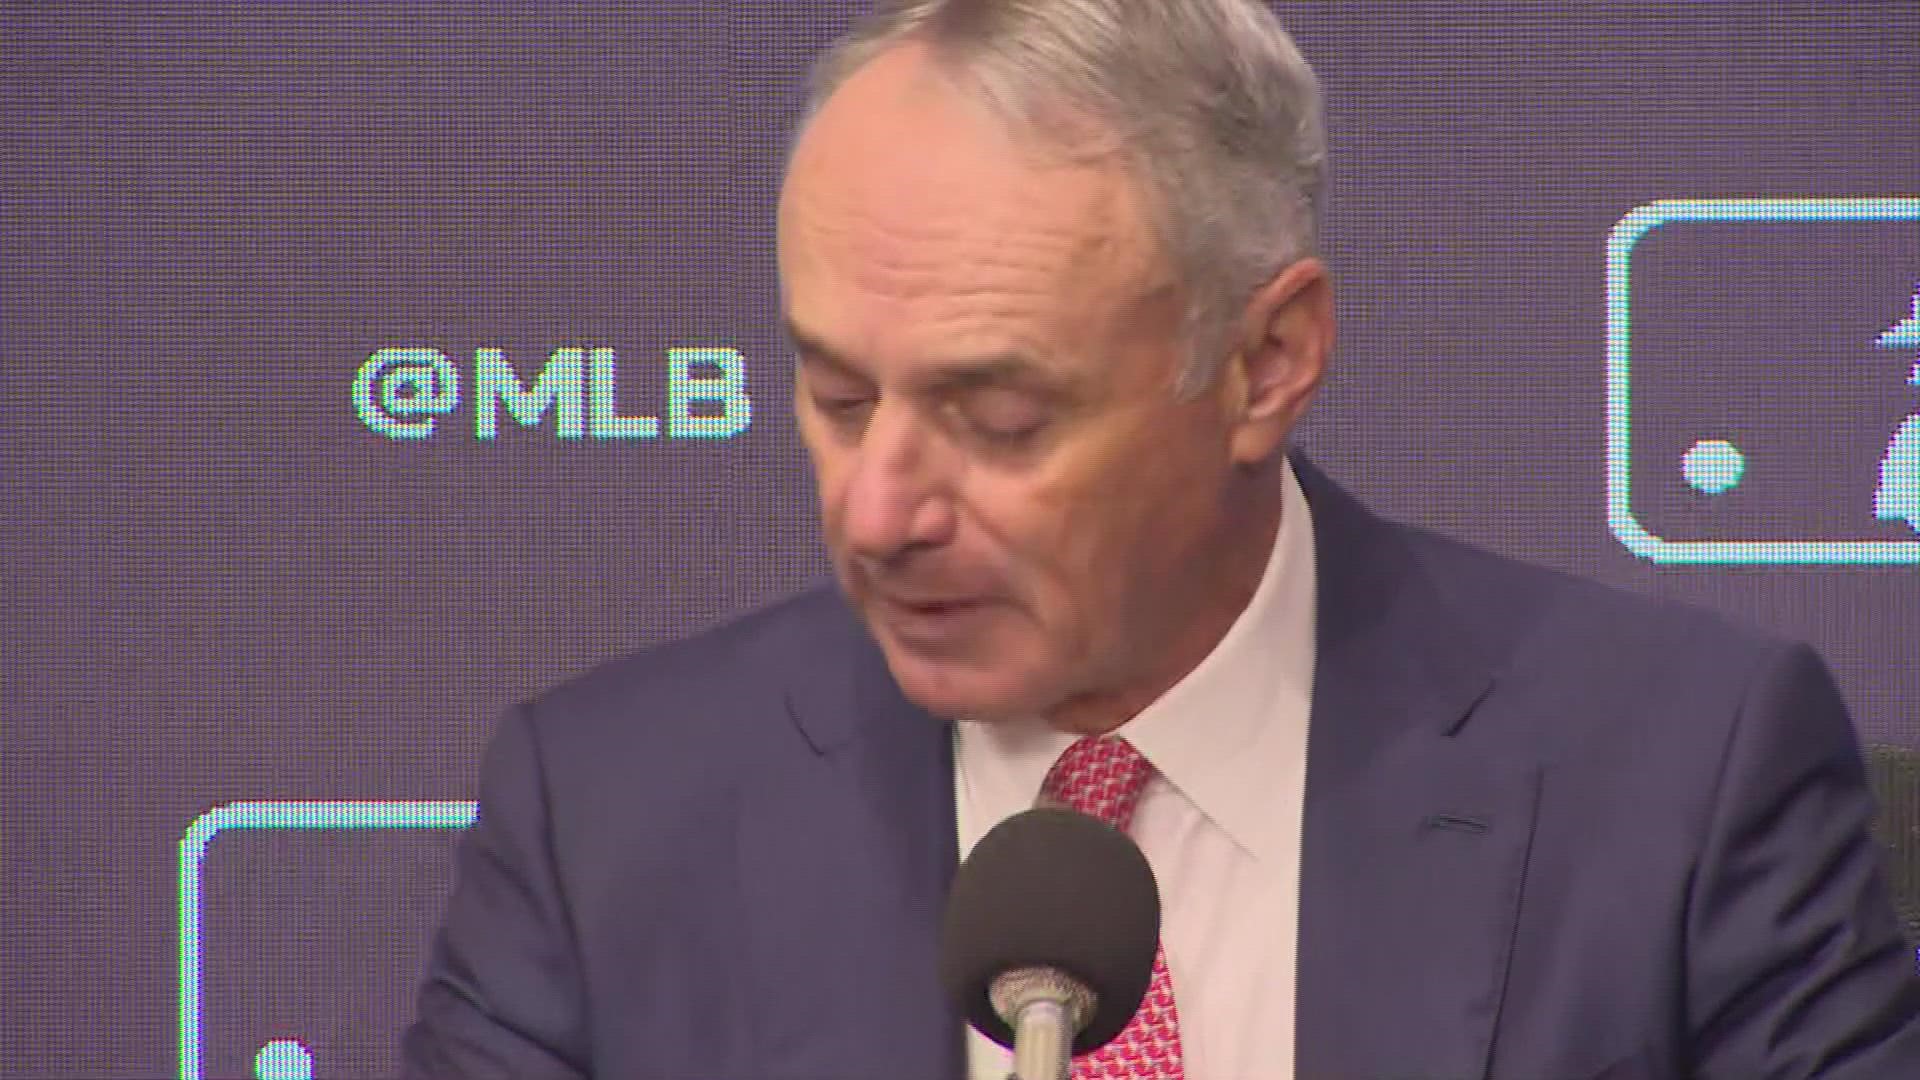 Hours into MLB's first work stoppage in 26 years, Commissioner Rob Manfred said the union's proposal for greater free agency would hurt small-market teams.